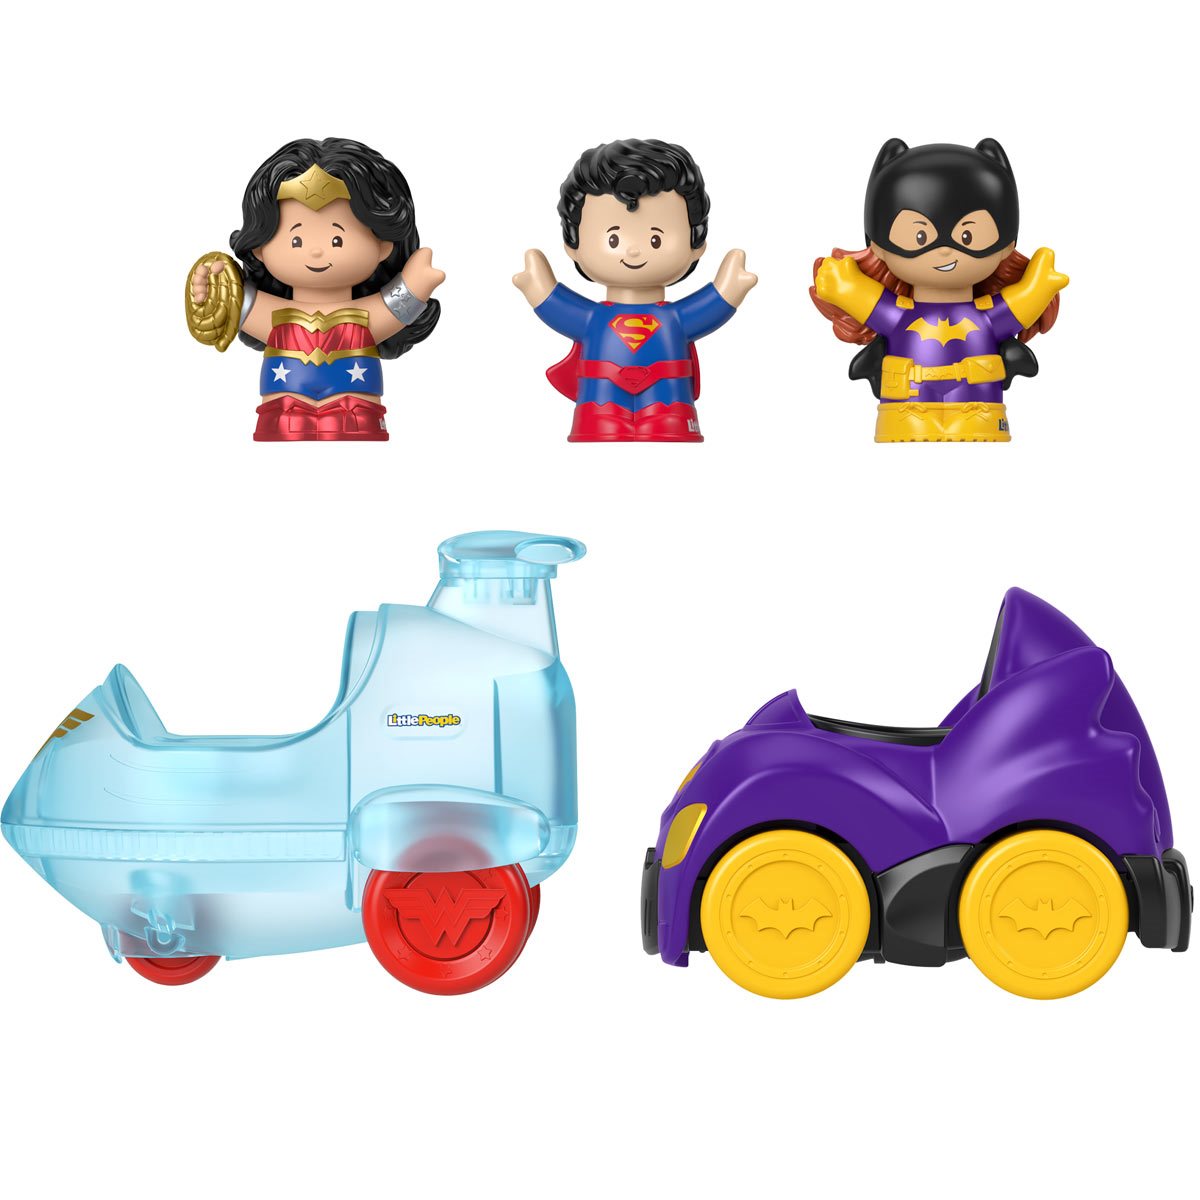 Batman Toy Vehicle and Figure Gift Set for Toddlers and Preschool Kids Ages 1 to 5 Years Fisher-Price Little People DC Super Friends Crime Fighting Gift Set